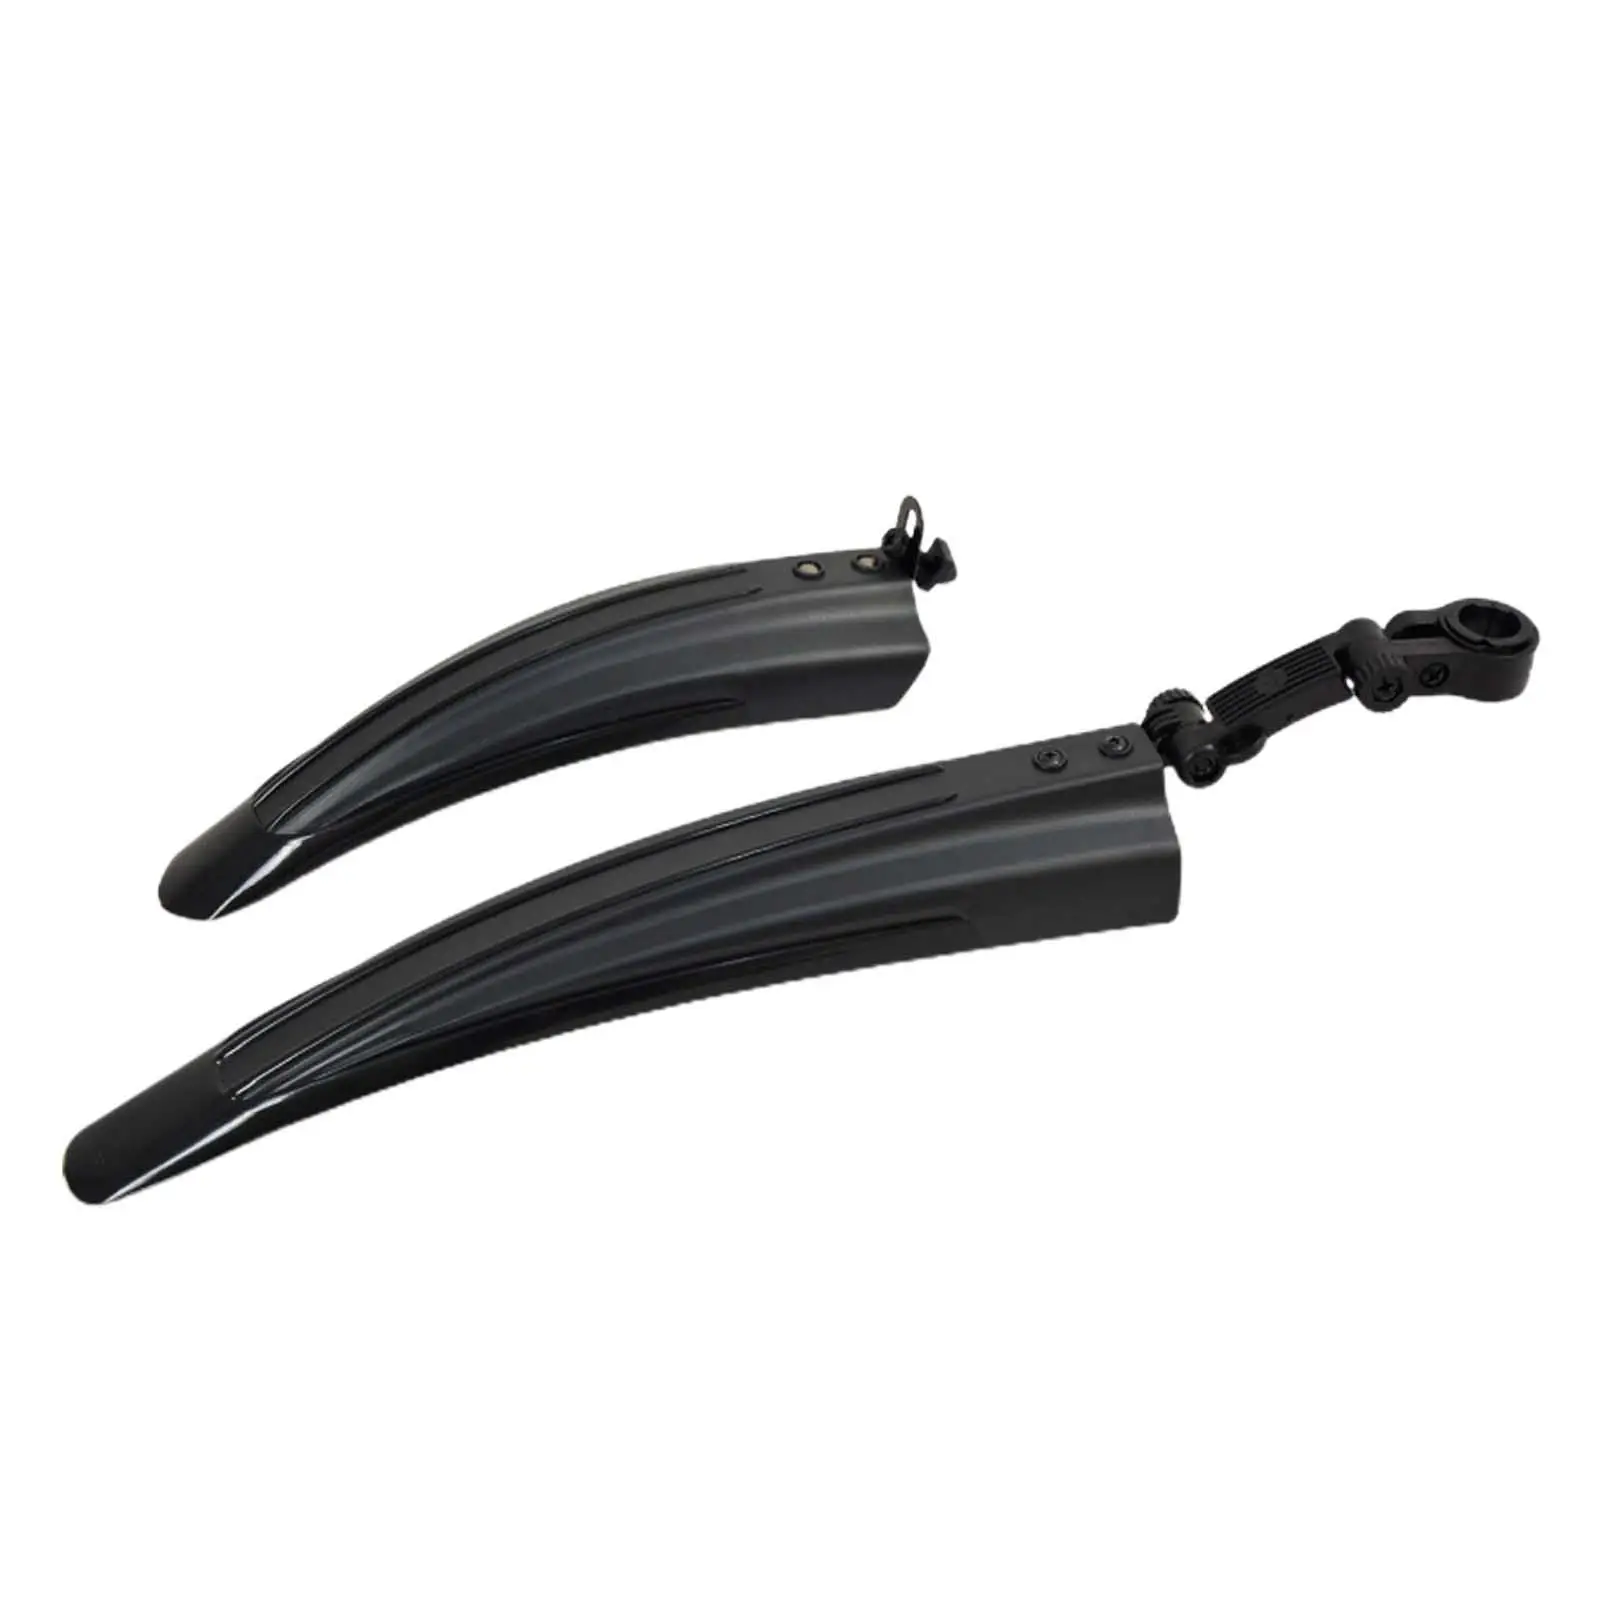 Bicycle Fenders Sets Cycling Tire Mud Guard for Road Bike Riding Accessories